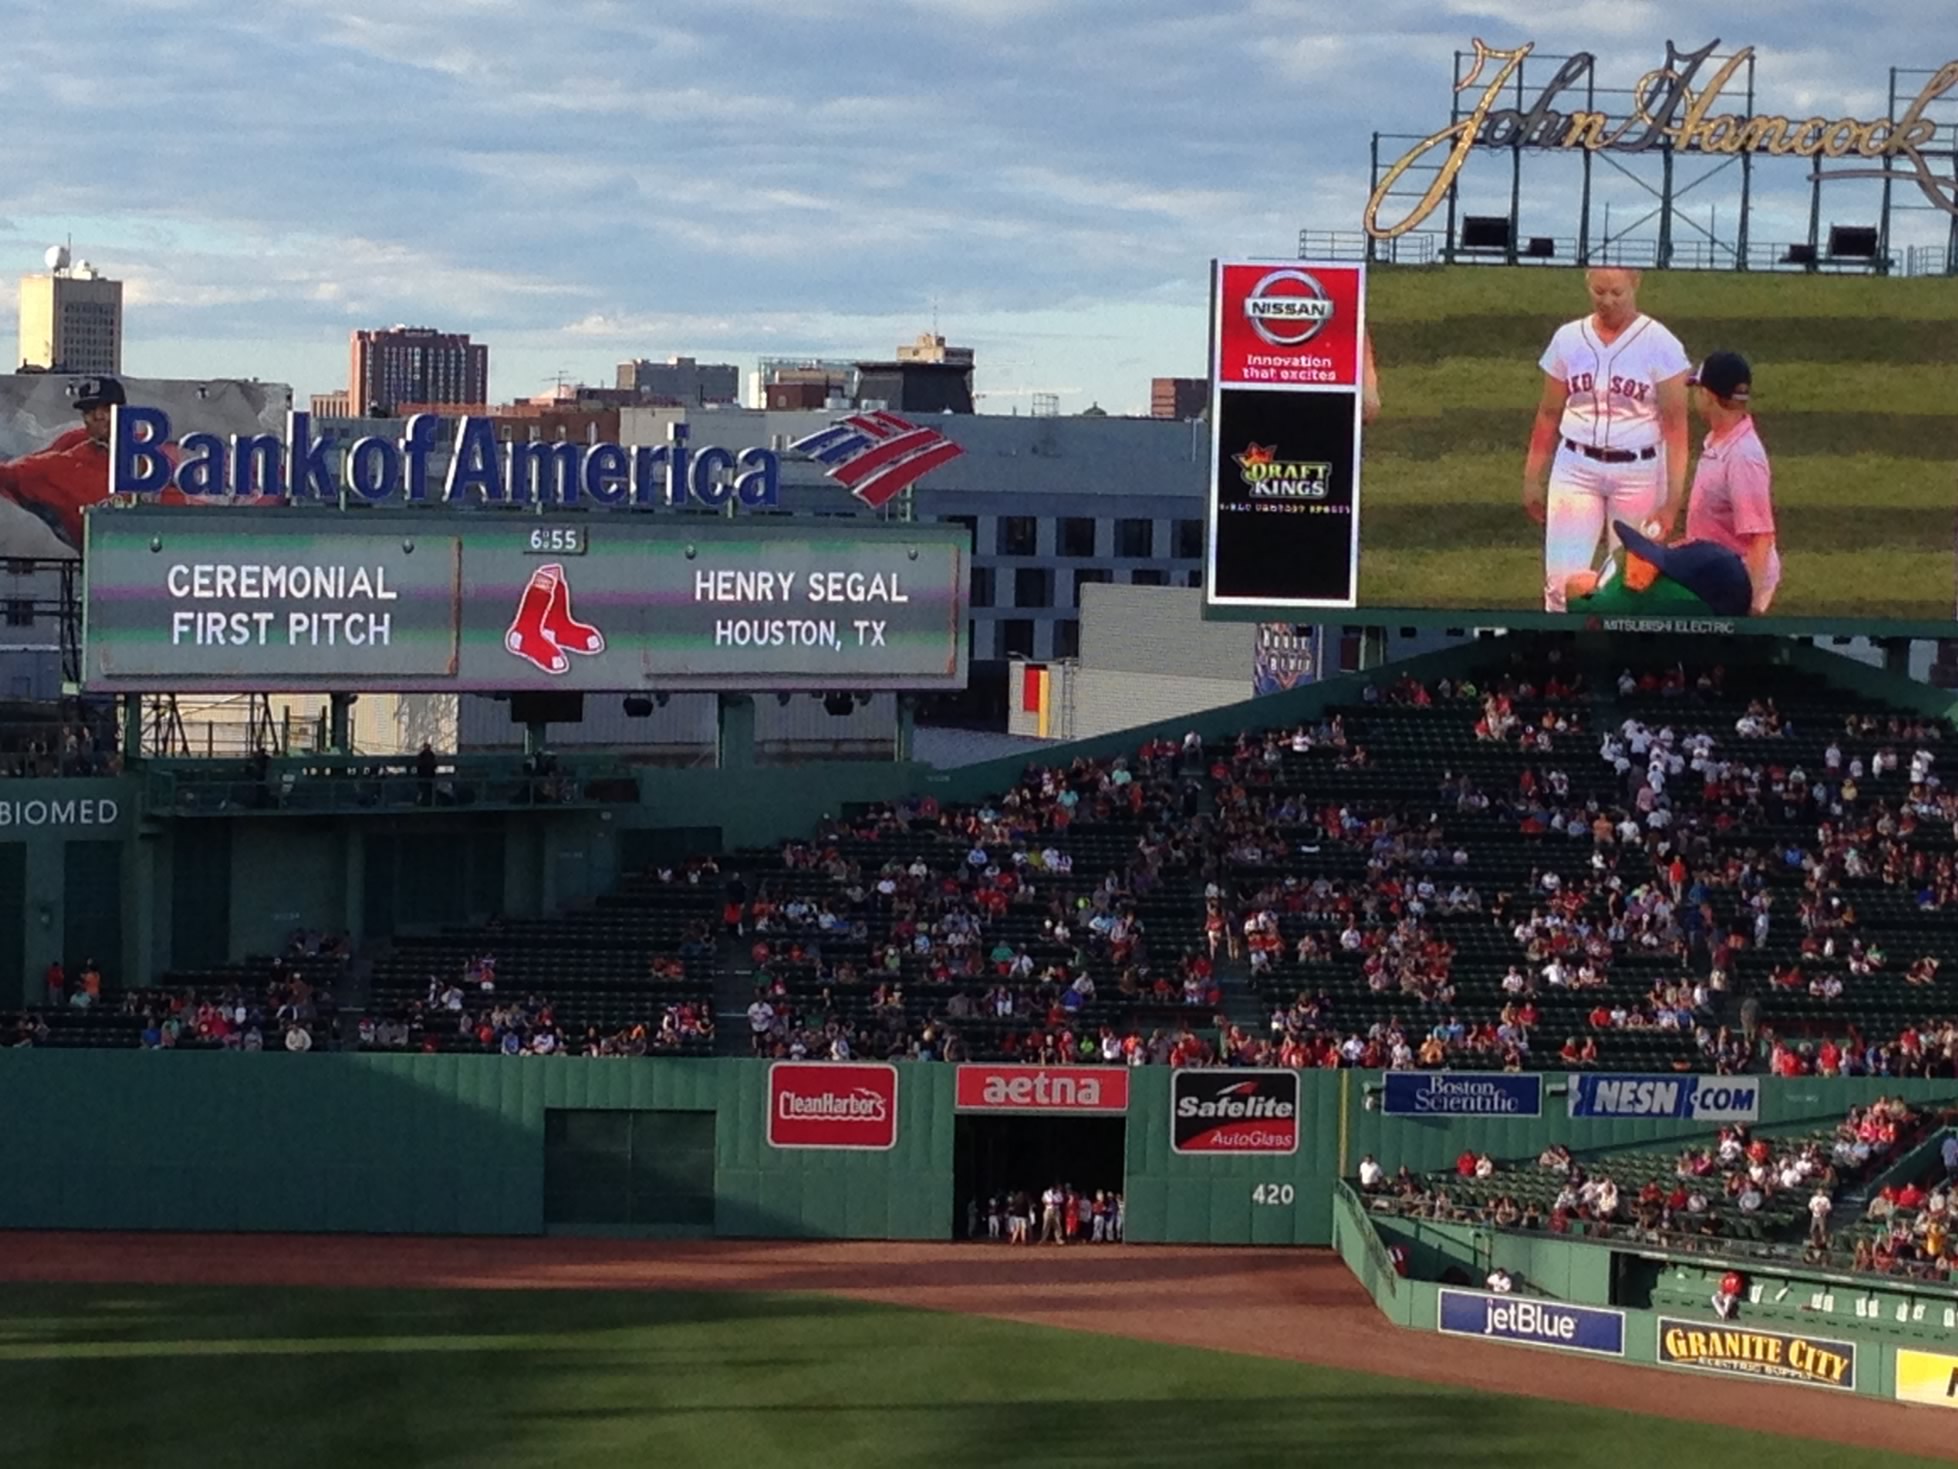 Now in centerfield at Fenway Park!